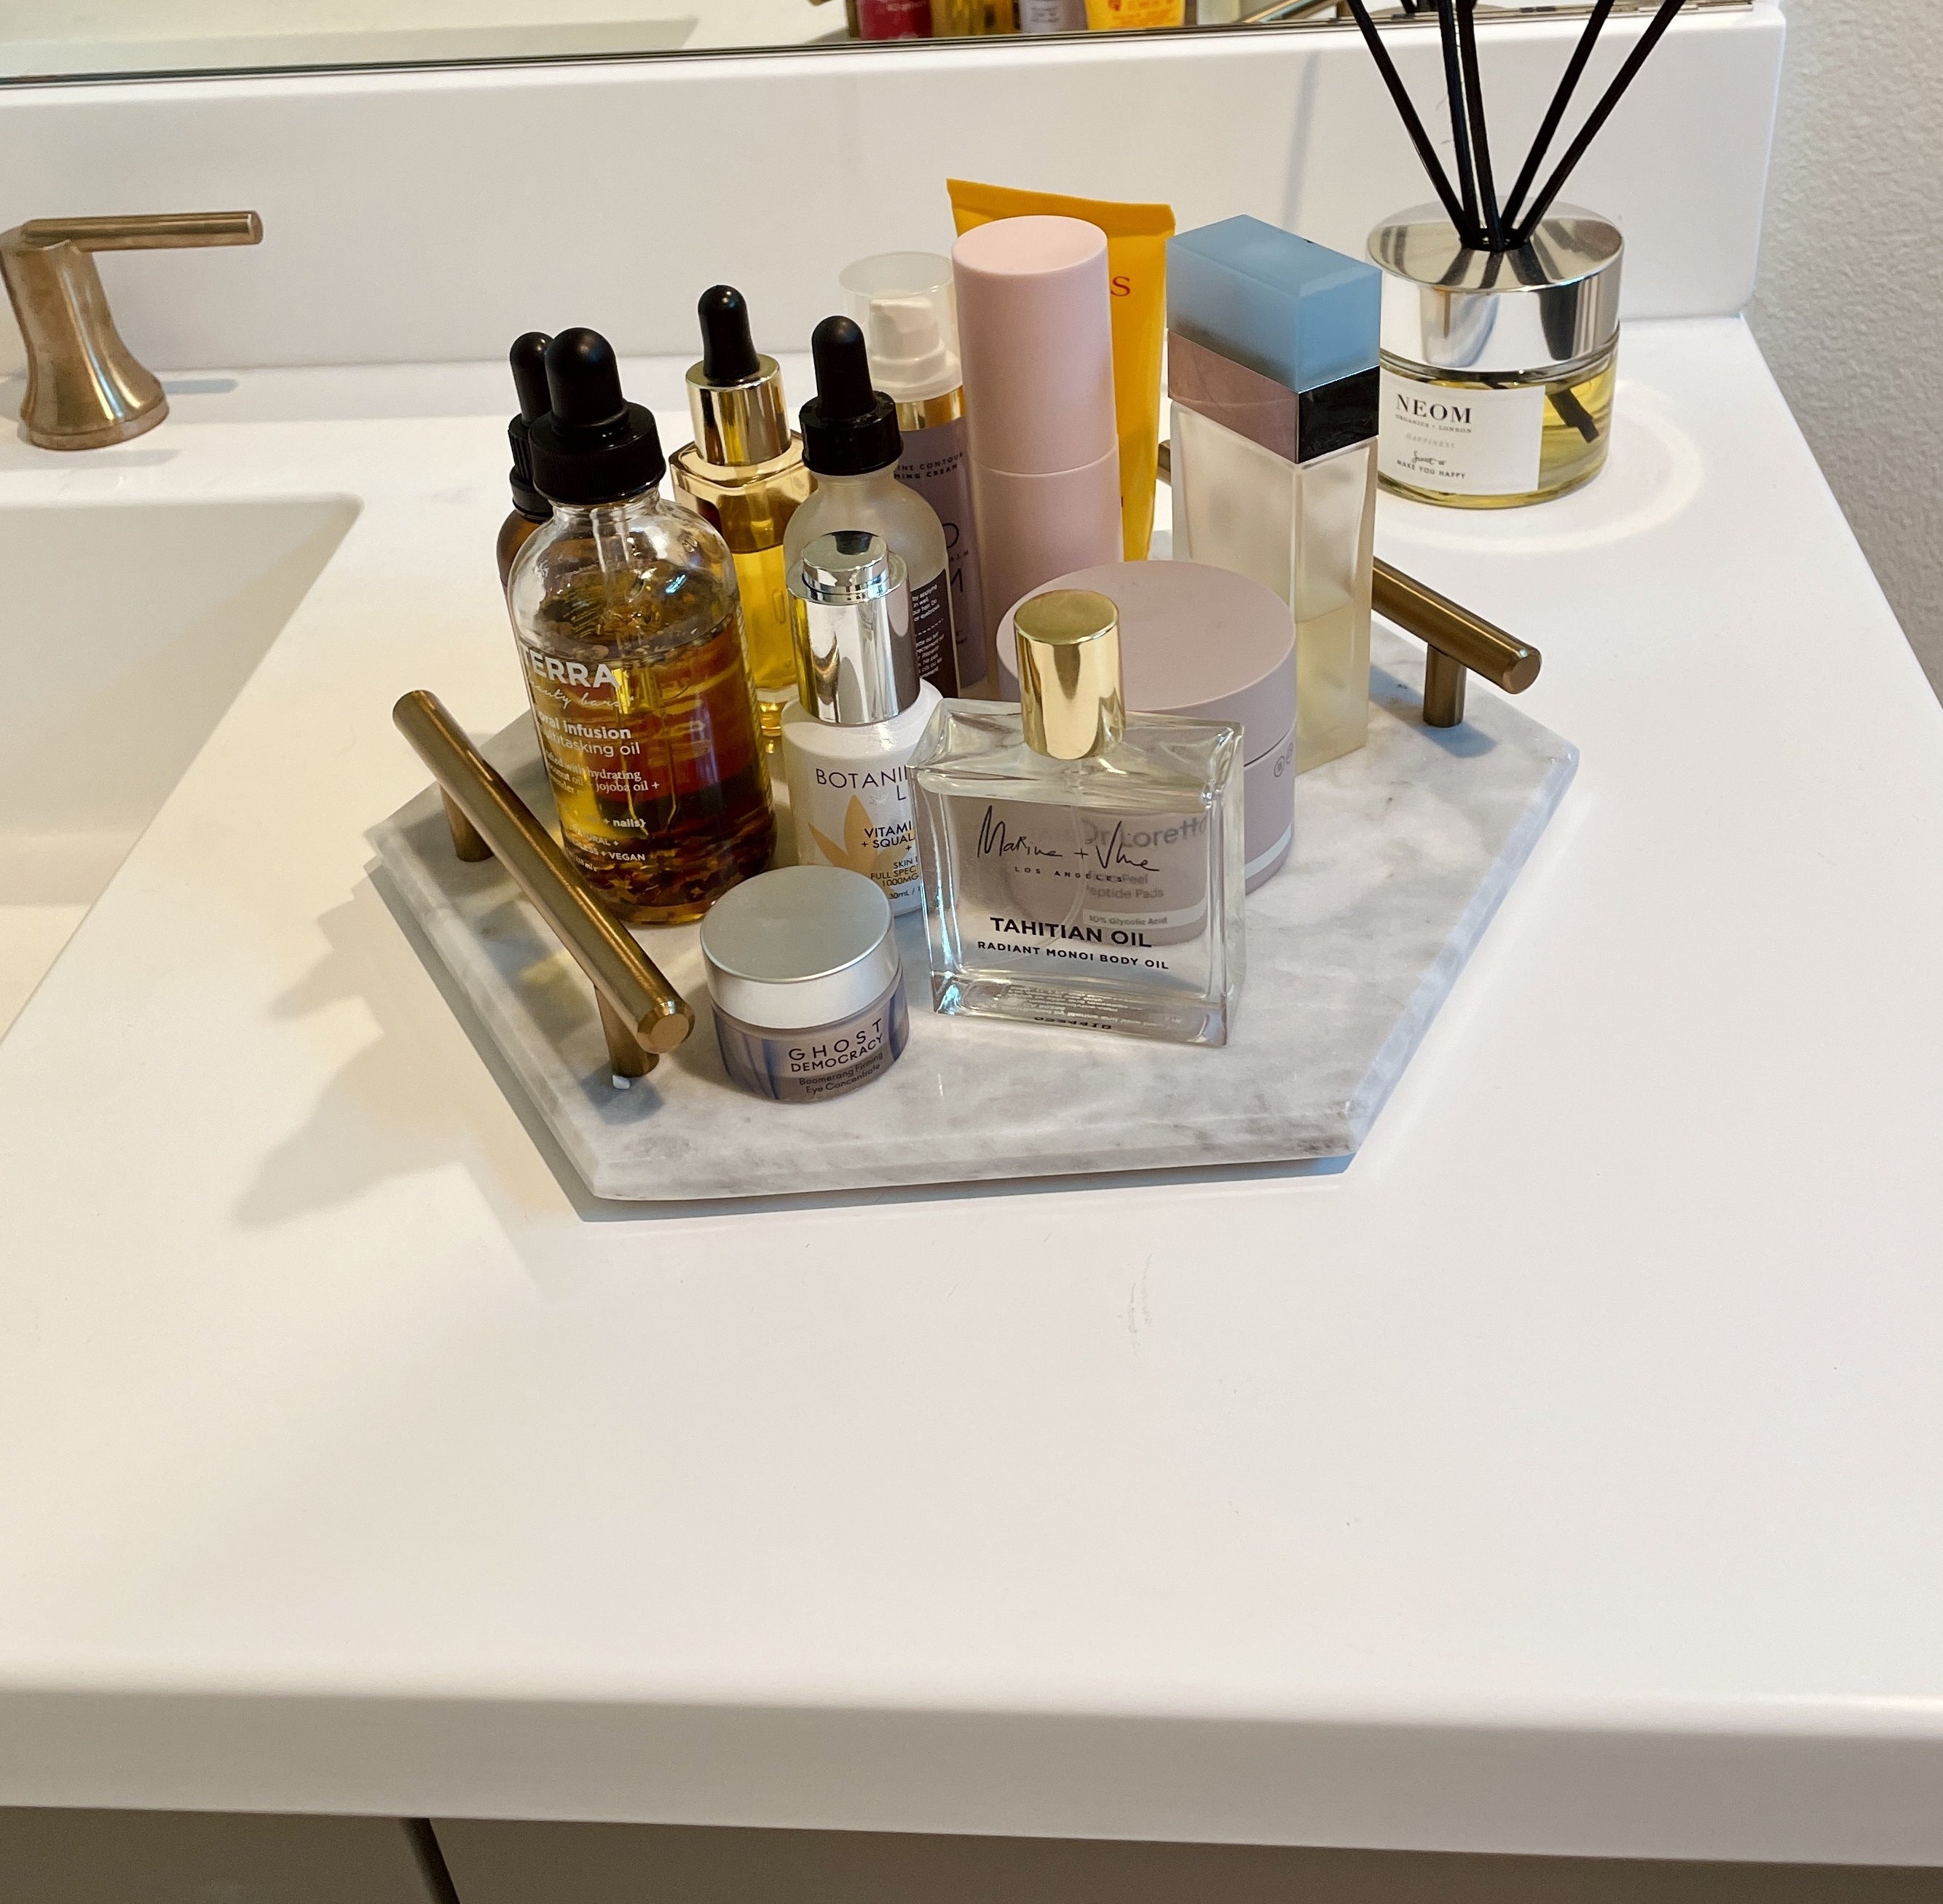 9 Bathroom Organizers from  for your Makeup & Hair Products! - I Spy  Fabulous